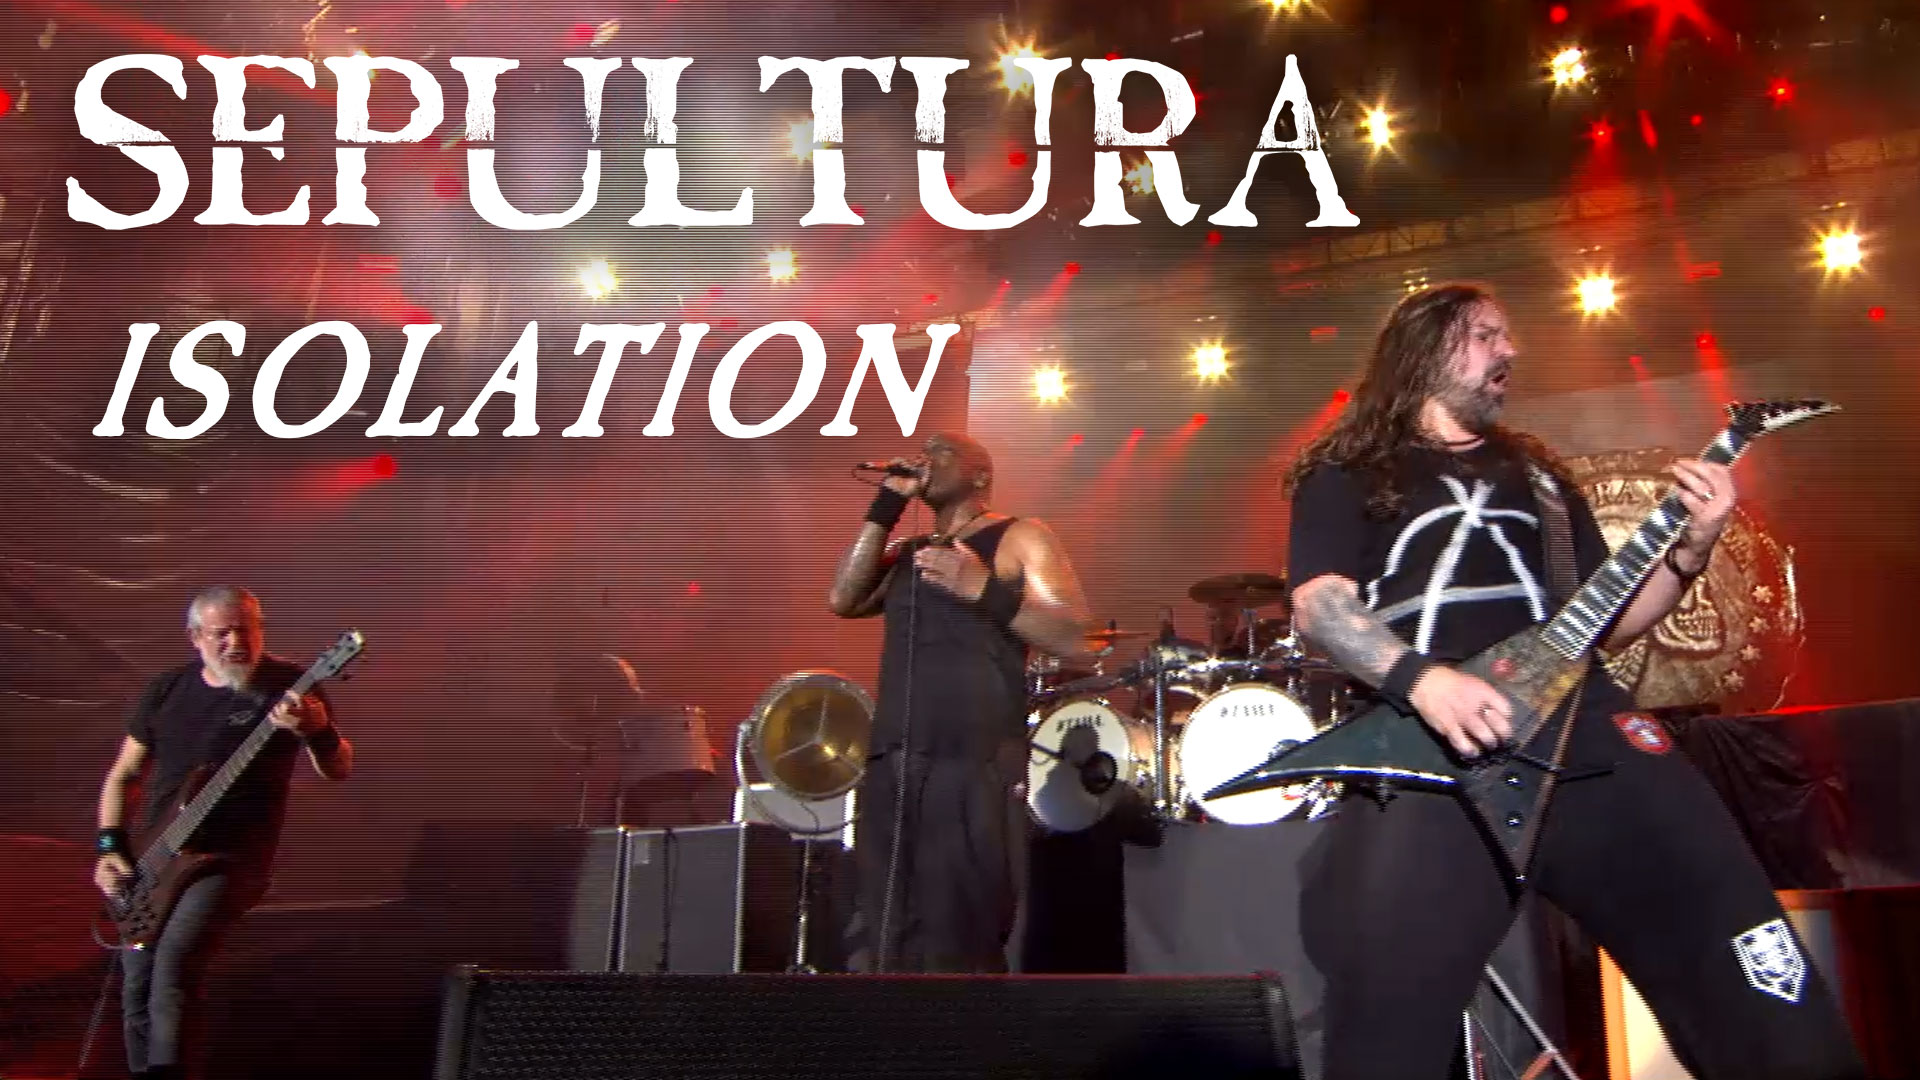 SEPULTURA - Welcome Devin Townsend To Their SepulQuarta Sessions!